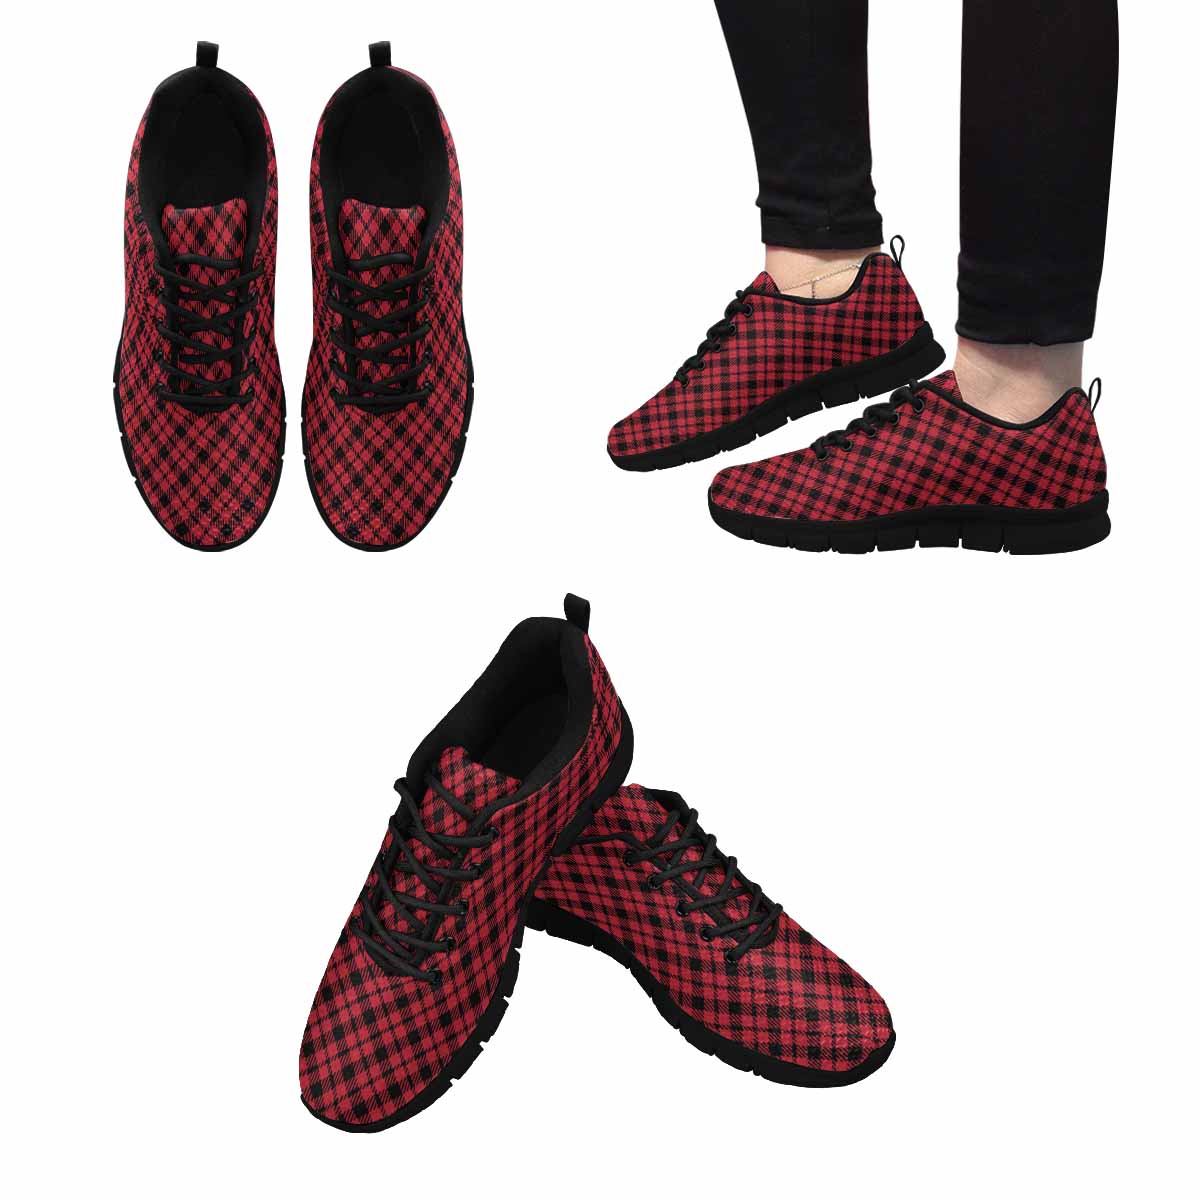 Sneakers For Men, Buffalo Plaid Red And Black Running Shoes Dg840